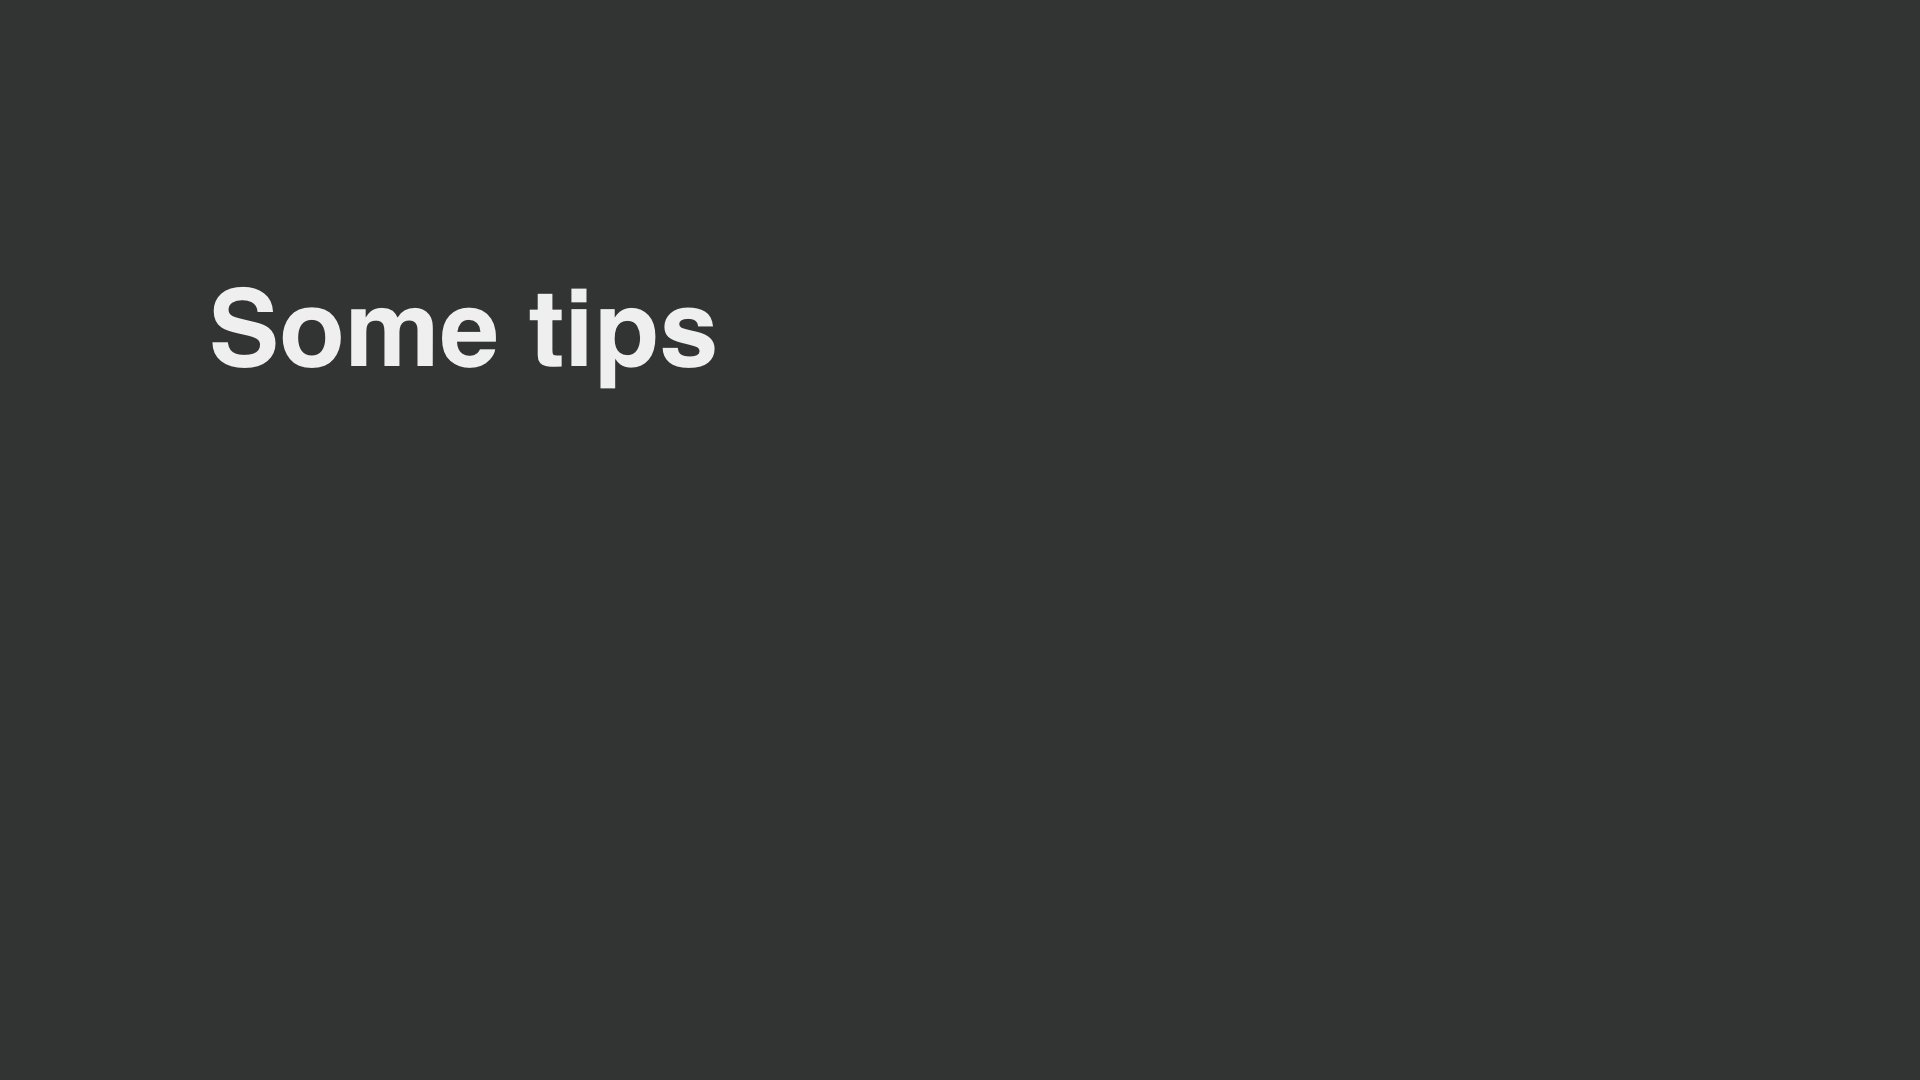 "some tips"